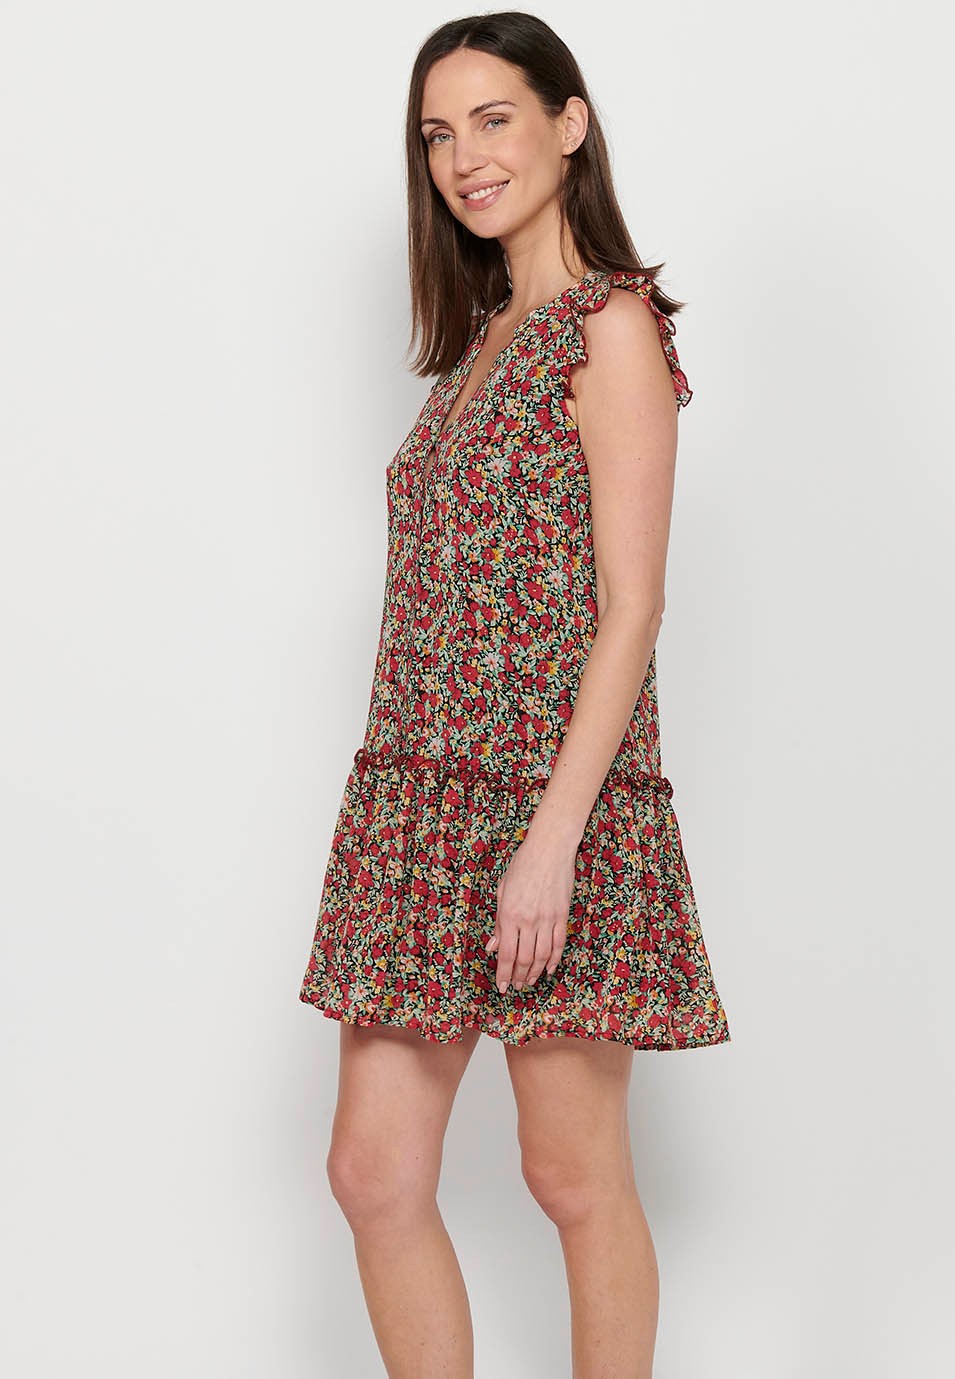 Short shirt dress with hip cut and ruffle finish with button front closure and Multicolor floral print for Women 2